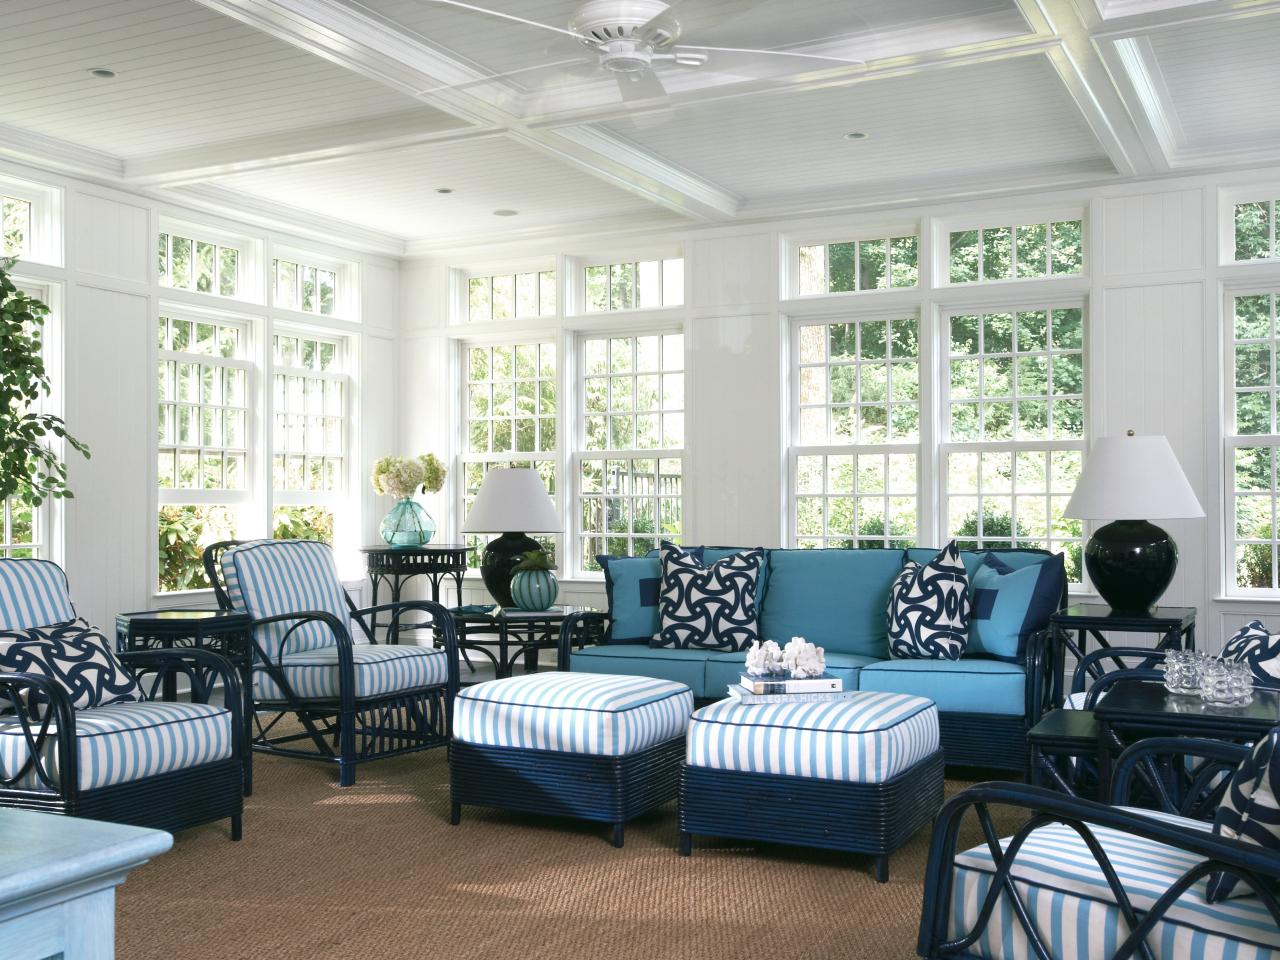 Sunroom with Blue and White Wicker Furniture | HGTV